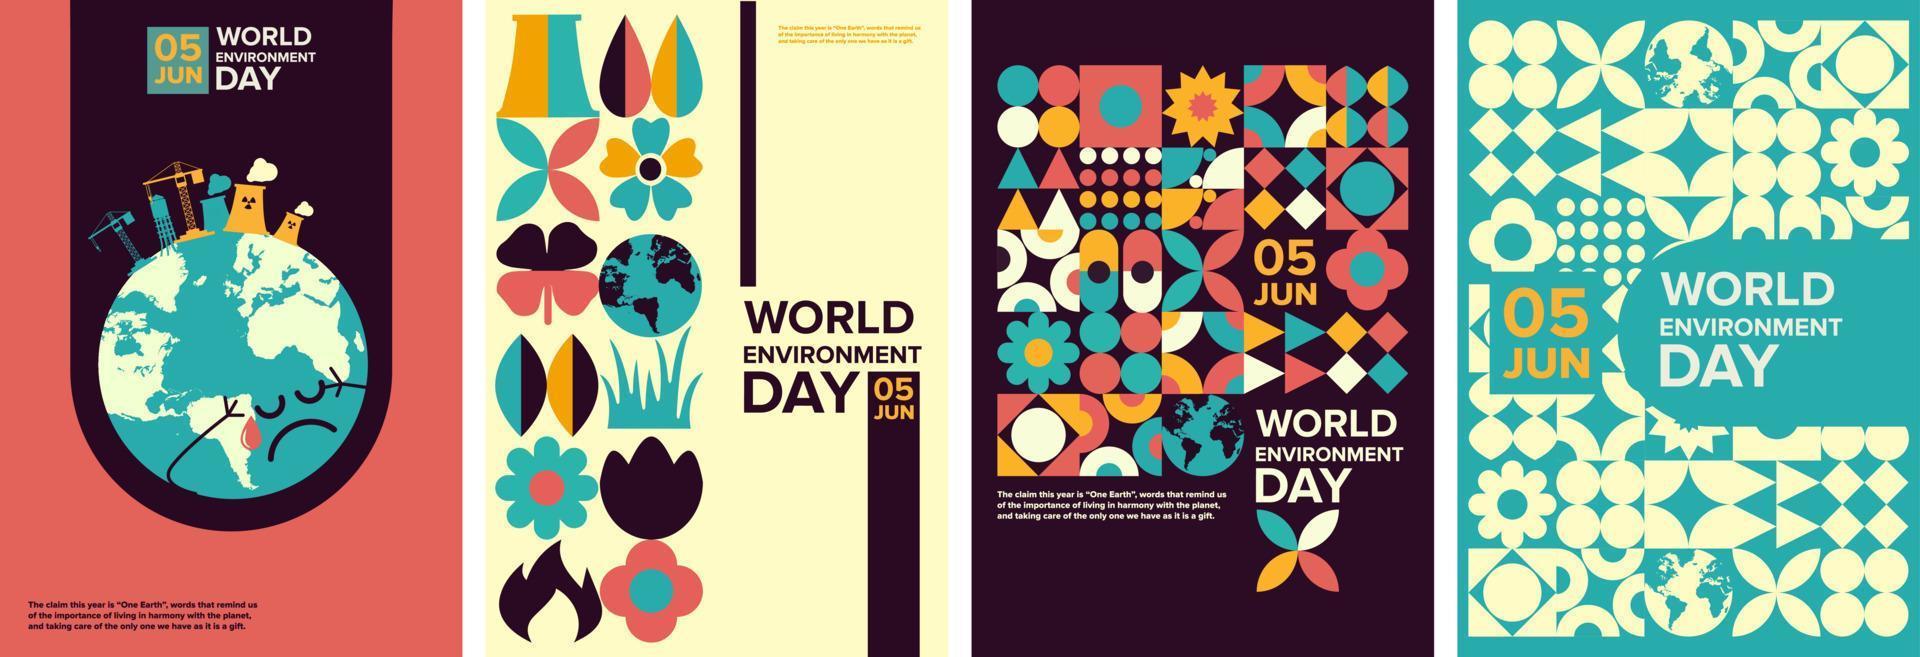 Happy world environment day. Earth day with the globe, geometric shape. Abstract book cover and background geometric vector illustration template.